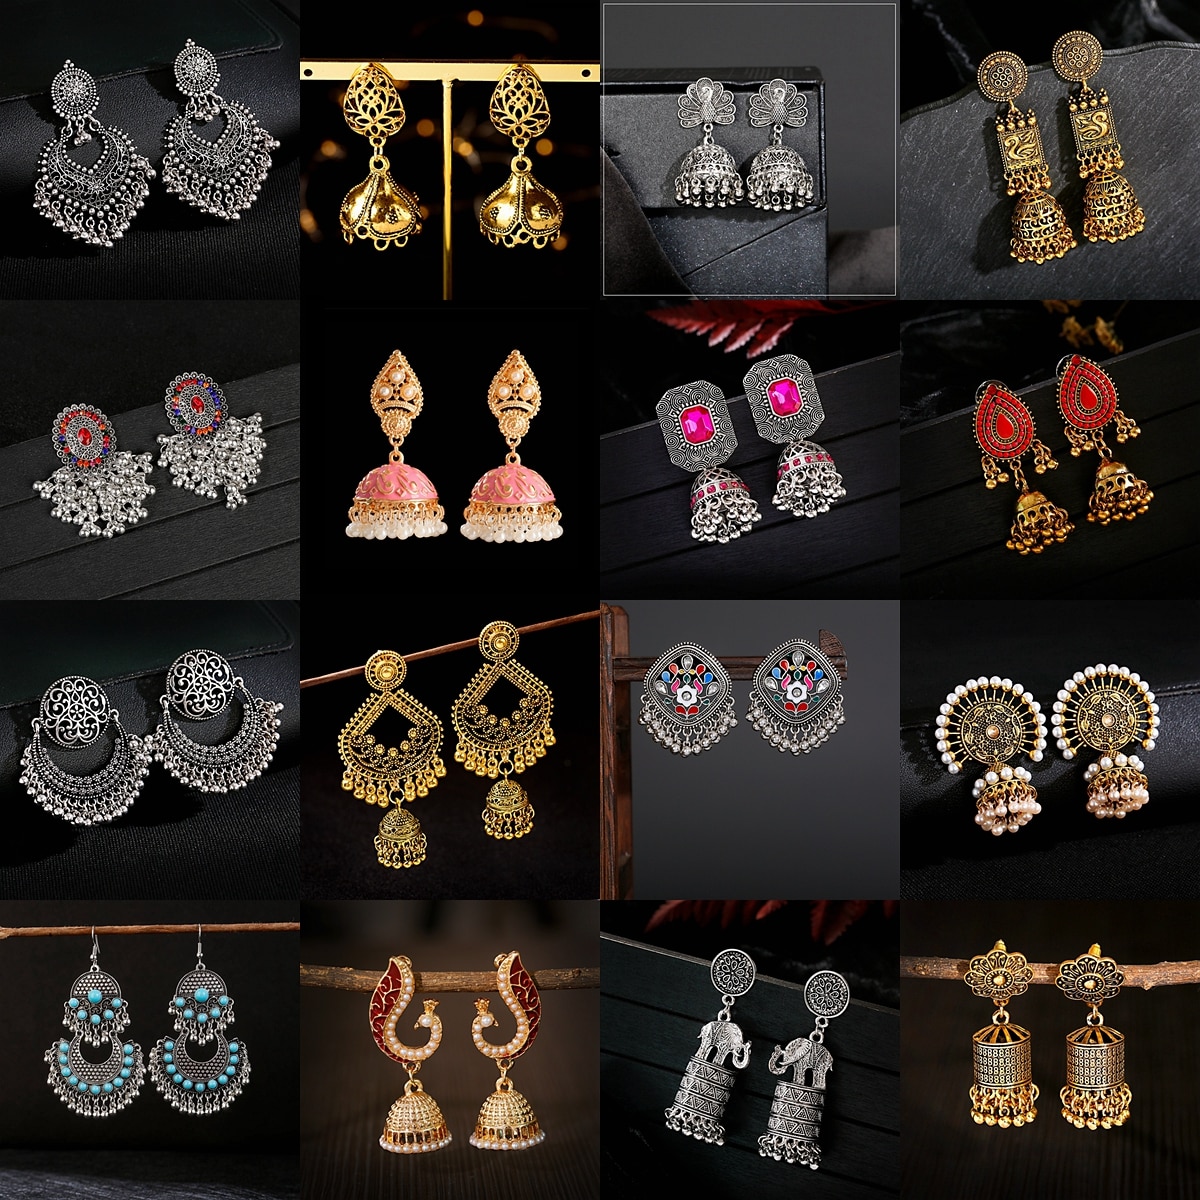 12-PairsLot-Boho-Afghan-Ethnic-Earrings-For-Women-Pendient-Pink-Gold-Silver-Color-Bell-Ladies-Indian-3256803995211369-3